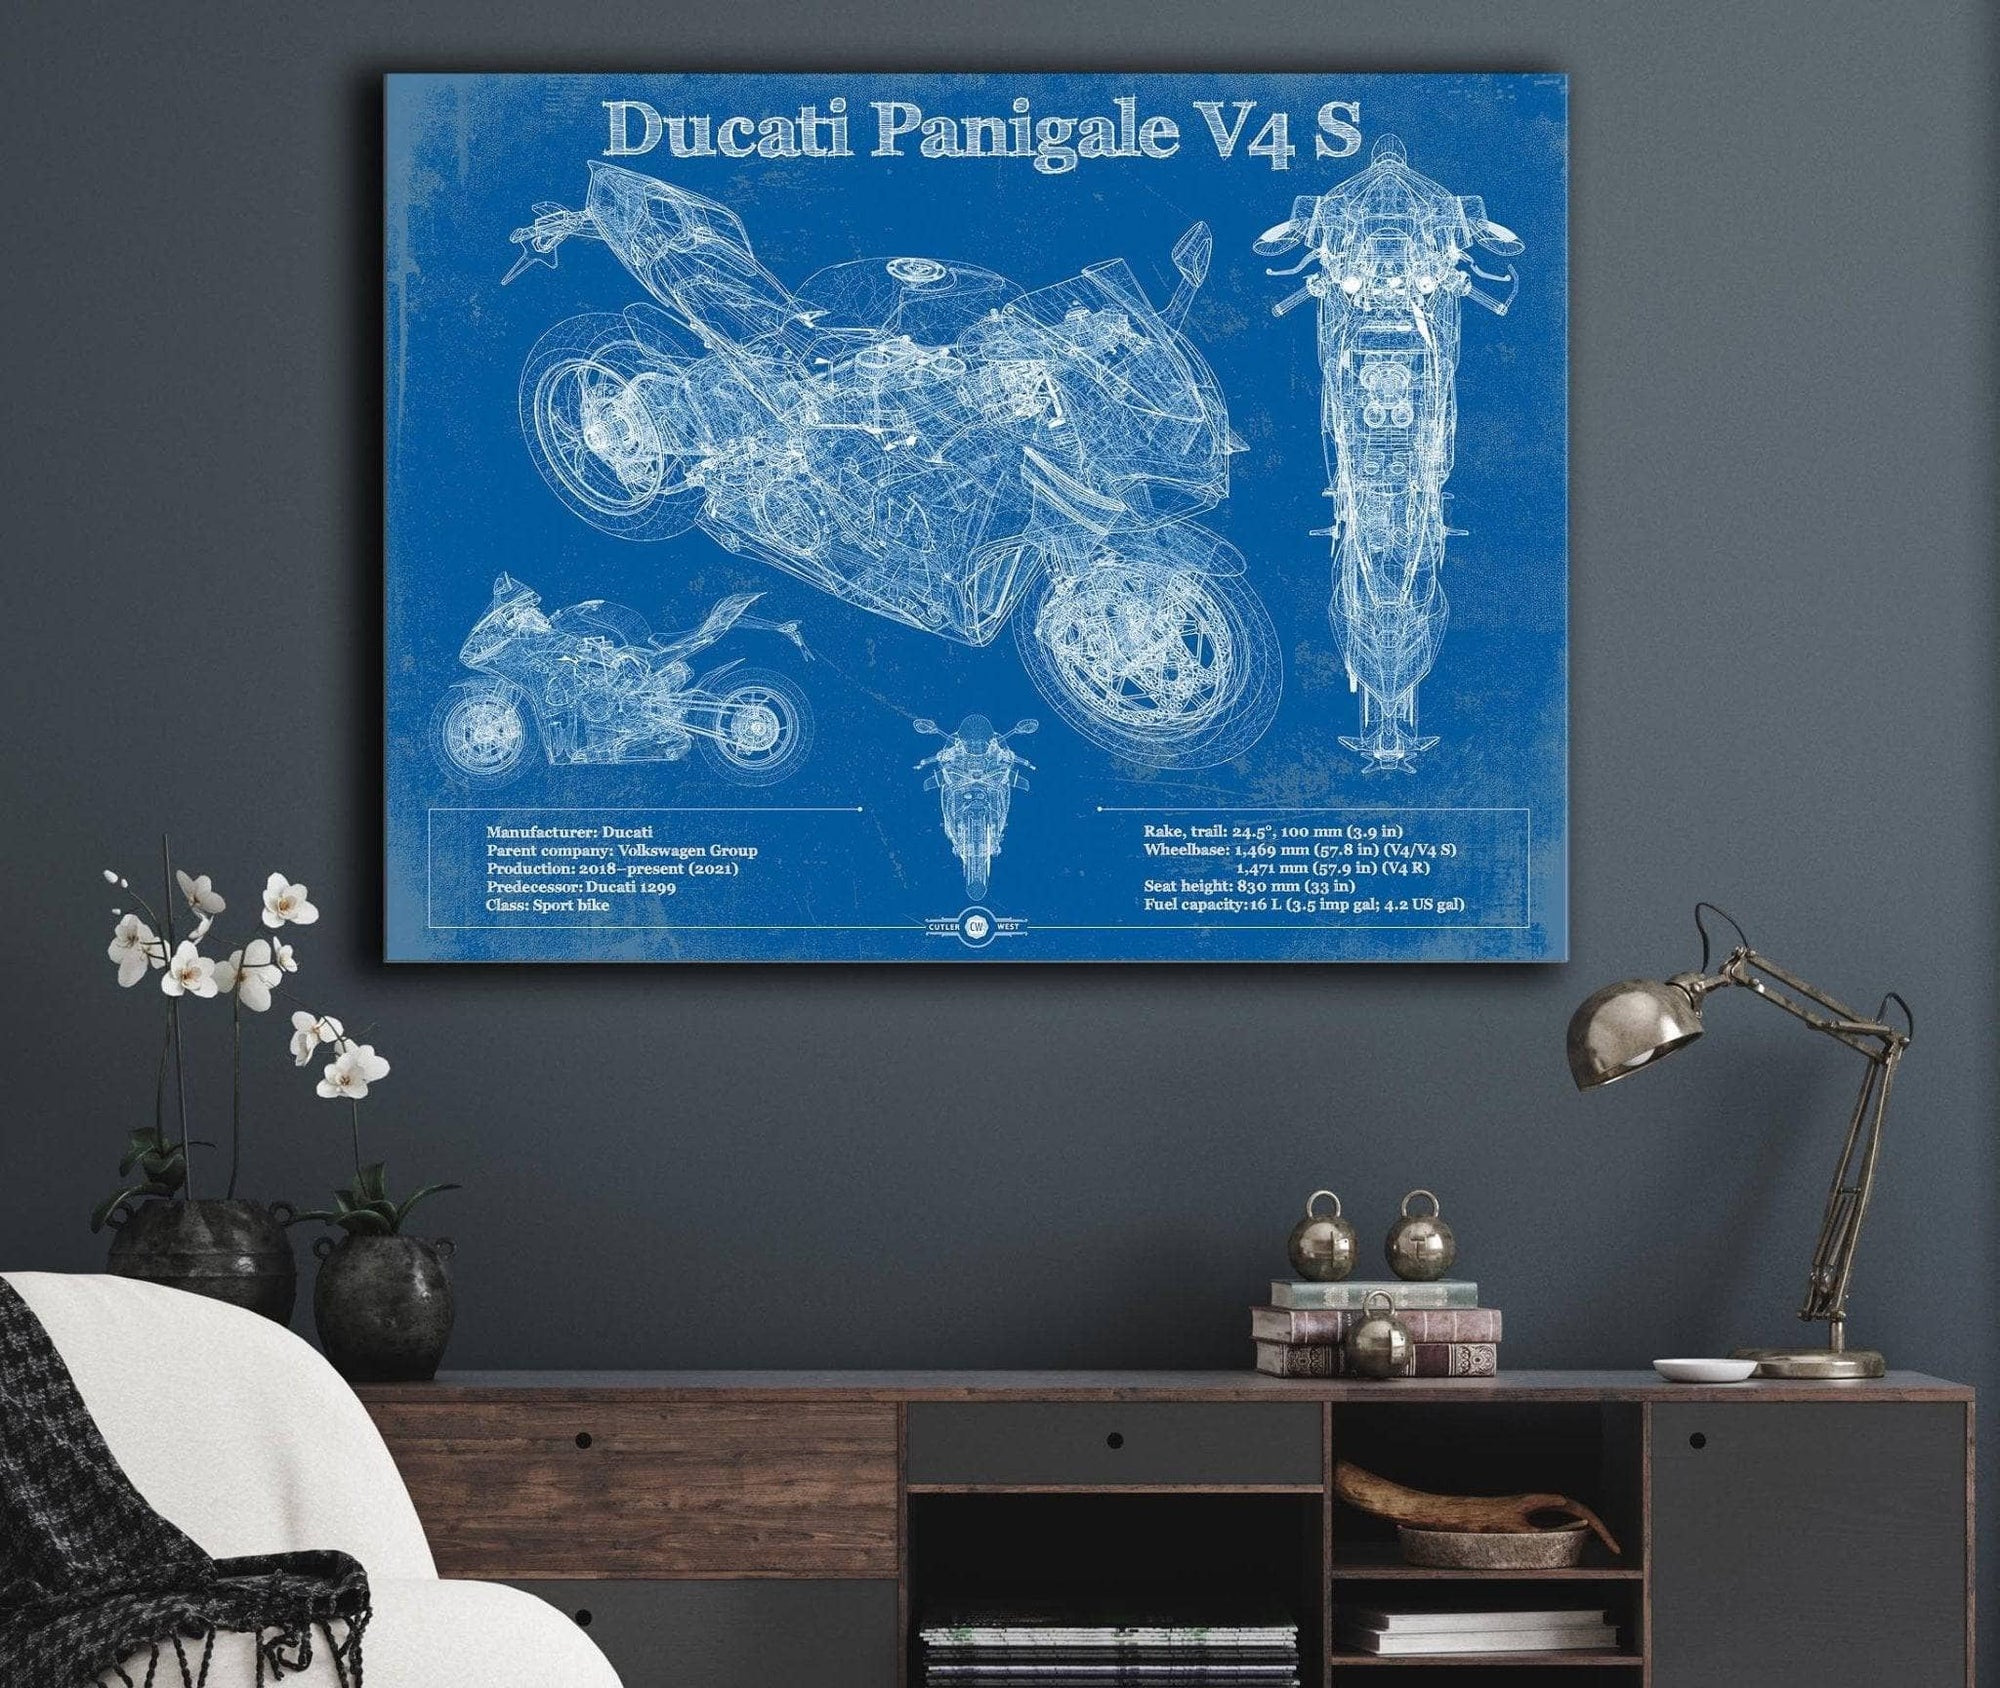 Cutler West Ducati Streetfighter V4 2020 Blueprint Motorcycle Patent Print